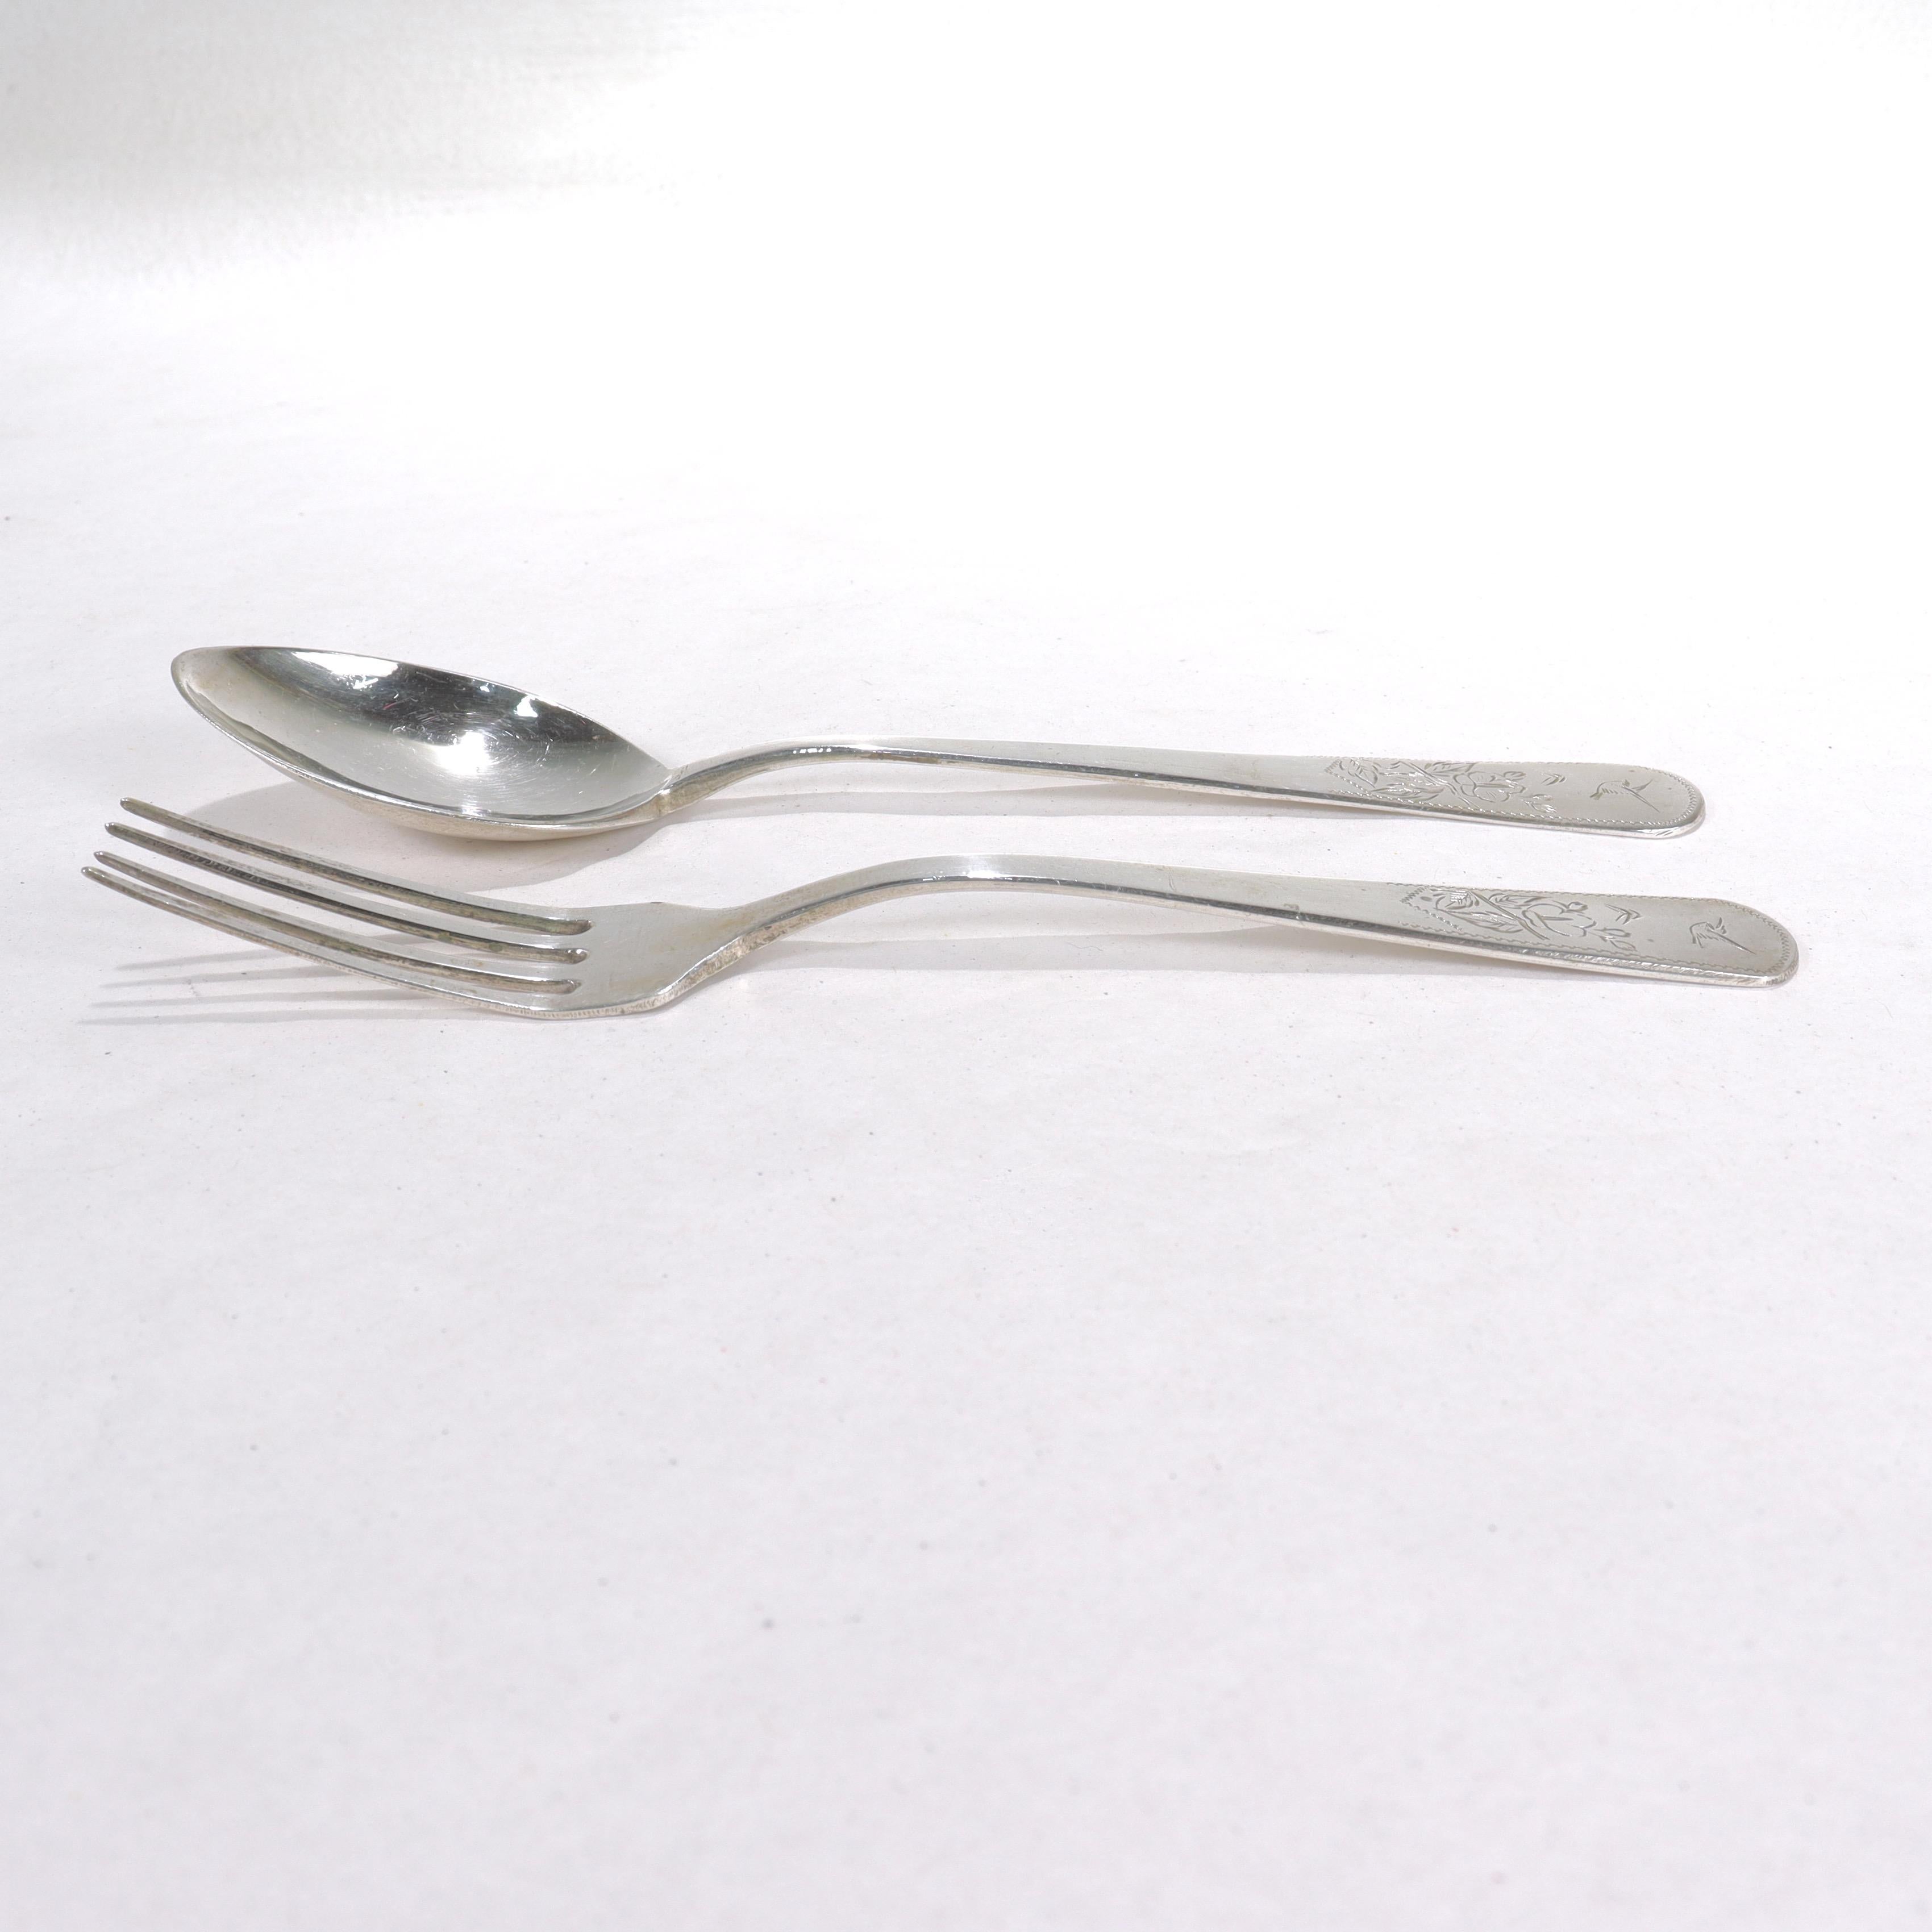 British Colonial Old or Antique Chinese Export Silver Fork & Spoon For Sale